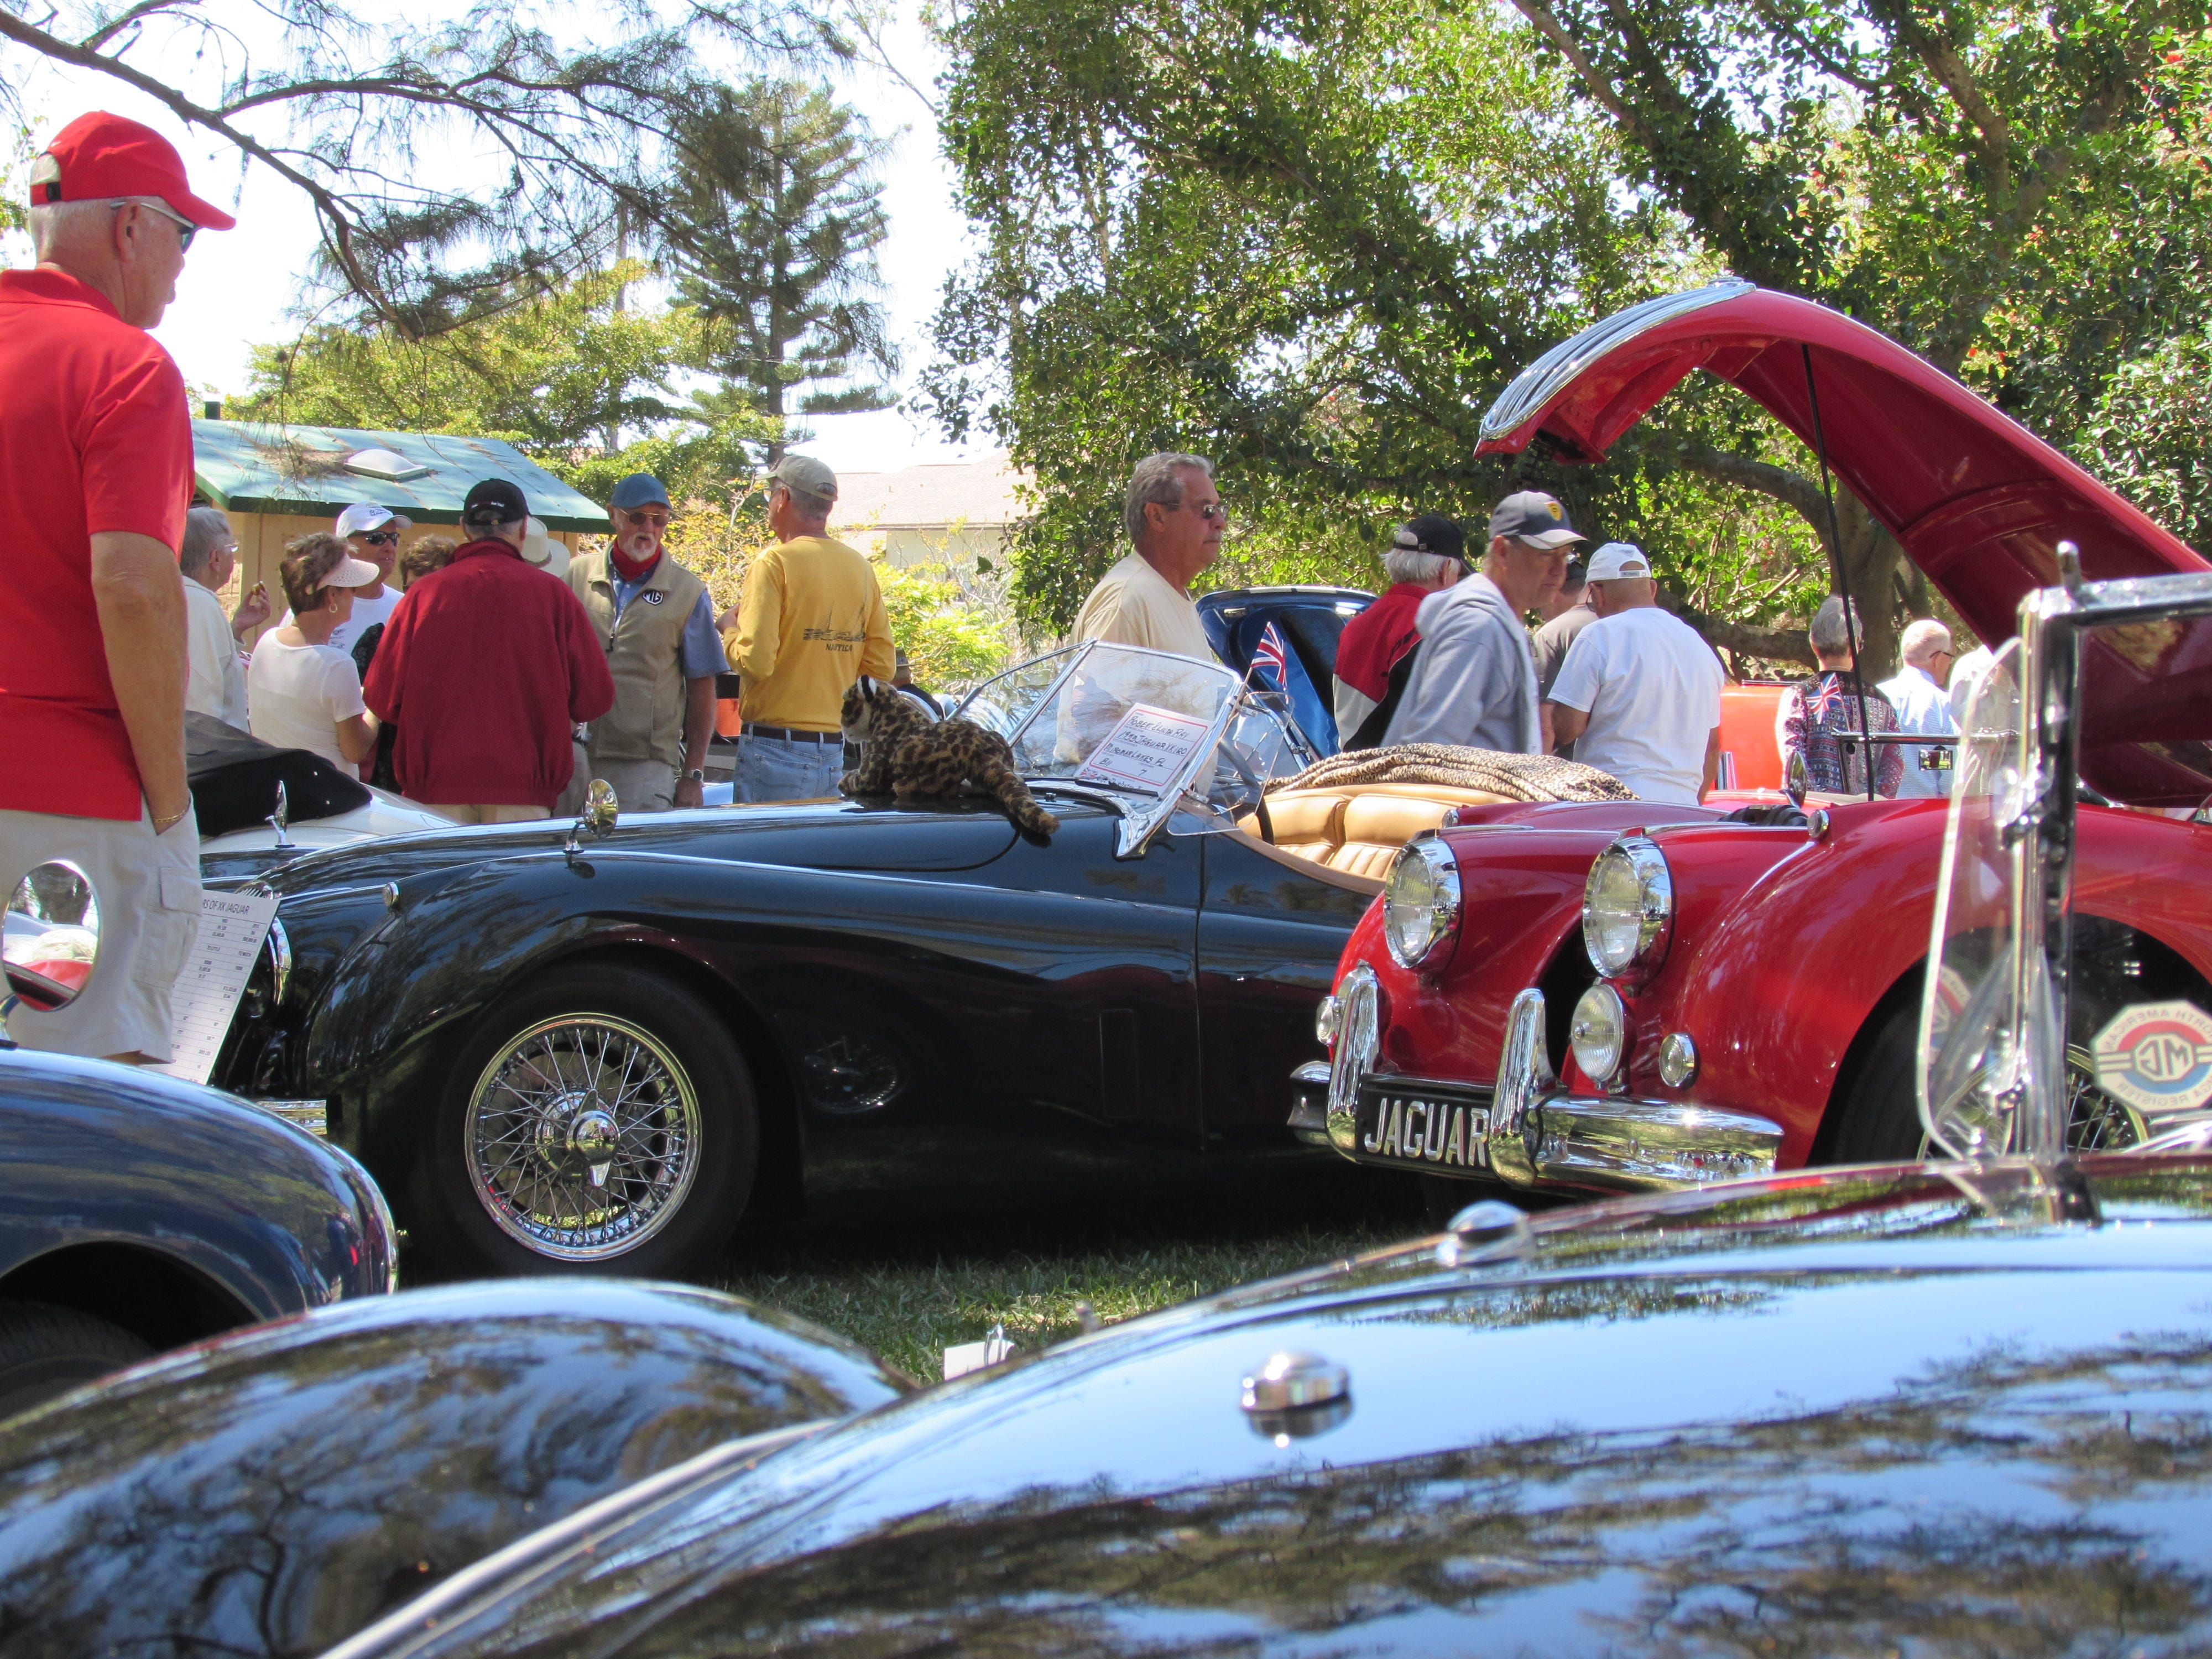 Free Lakewood ranch antique car show with Best Inspiration